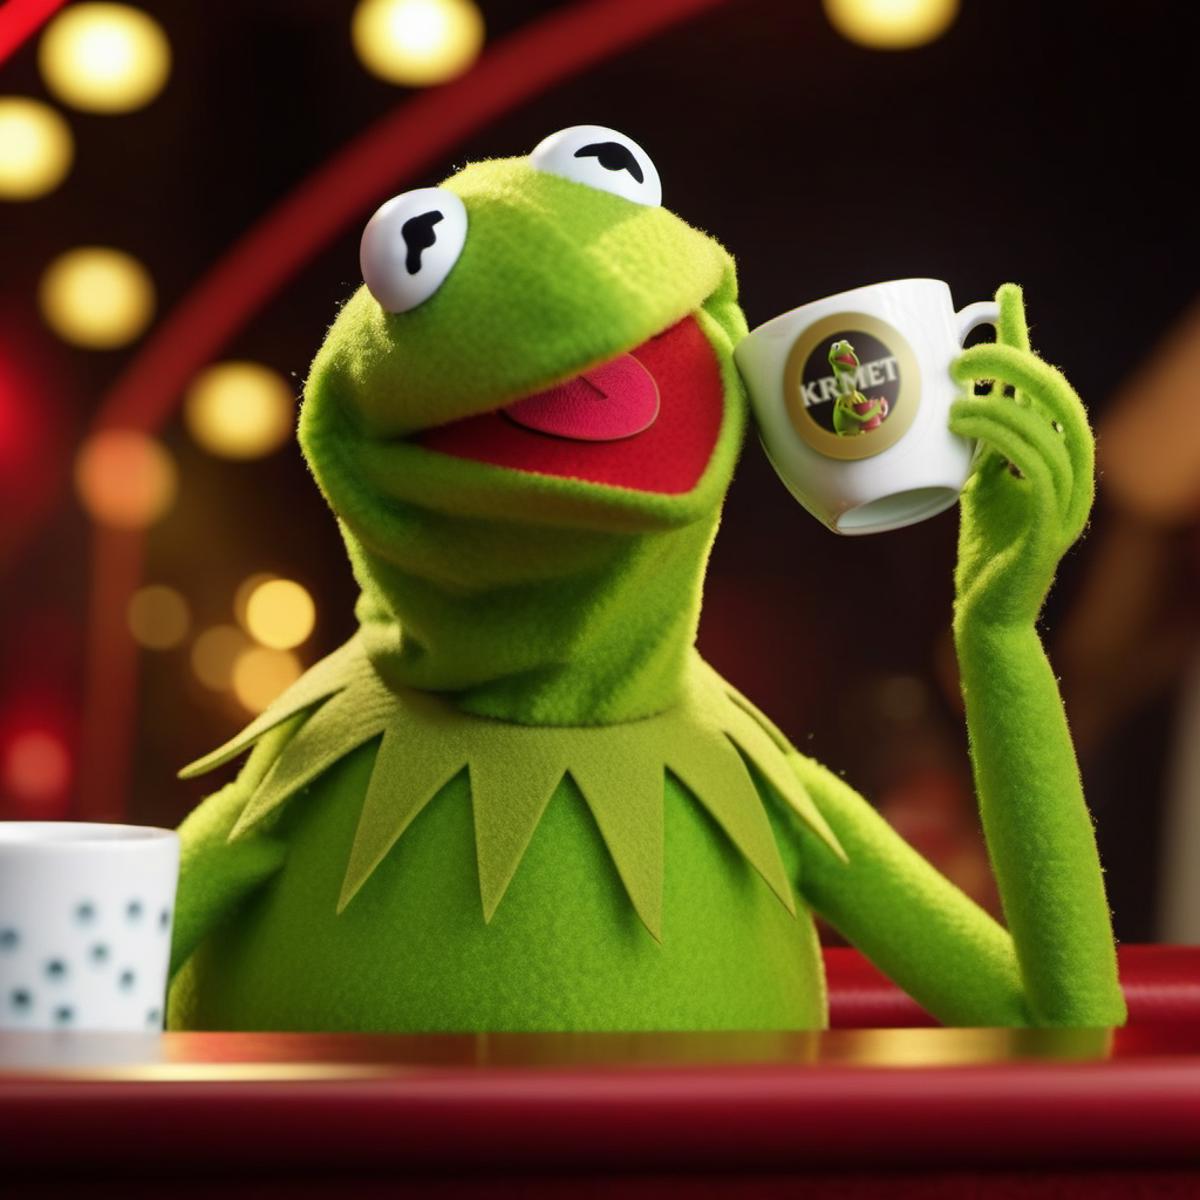 Kermit the Frog - SDXL image by PhotobAIt